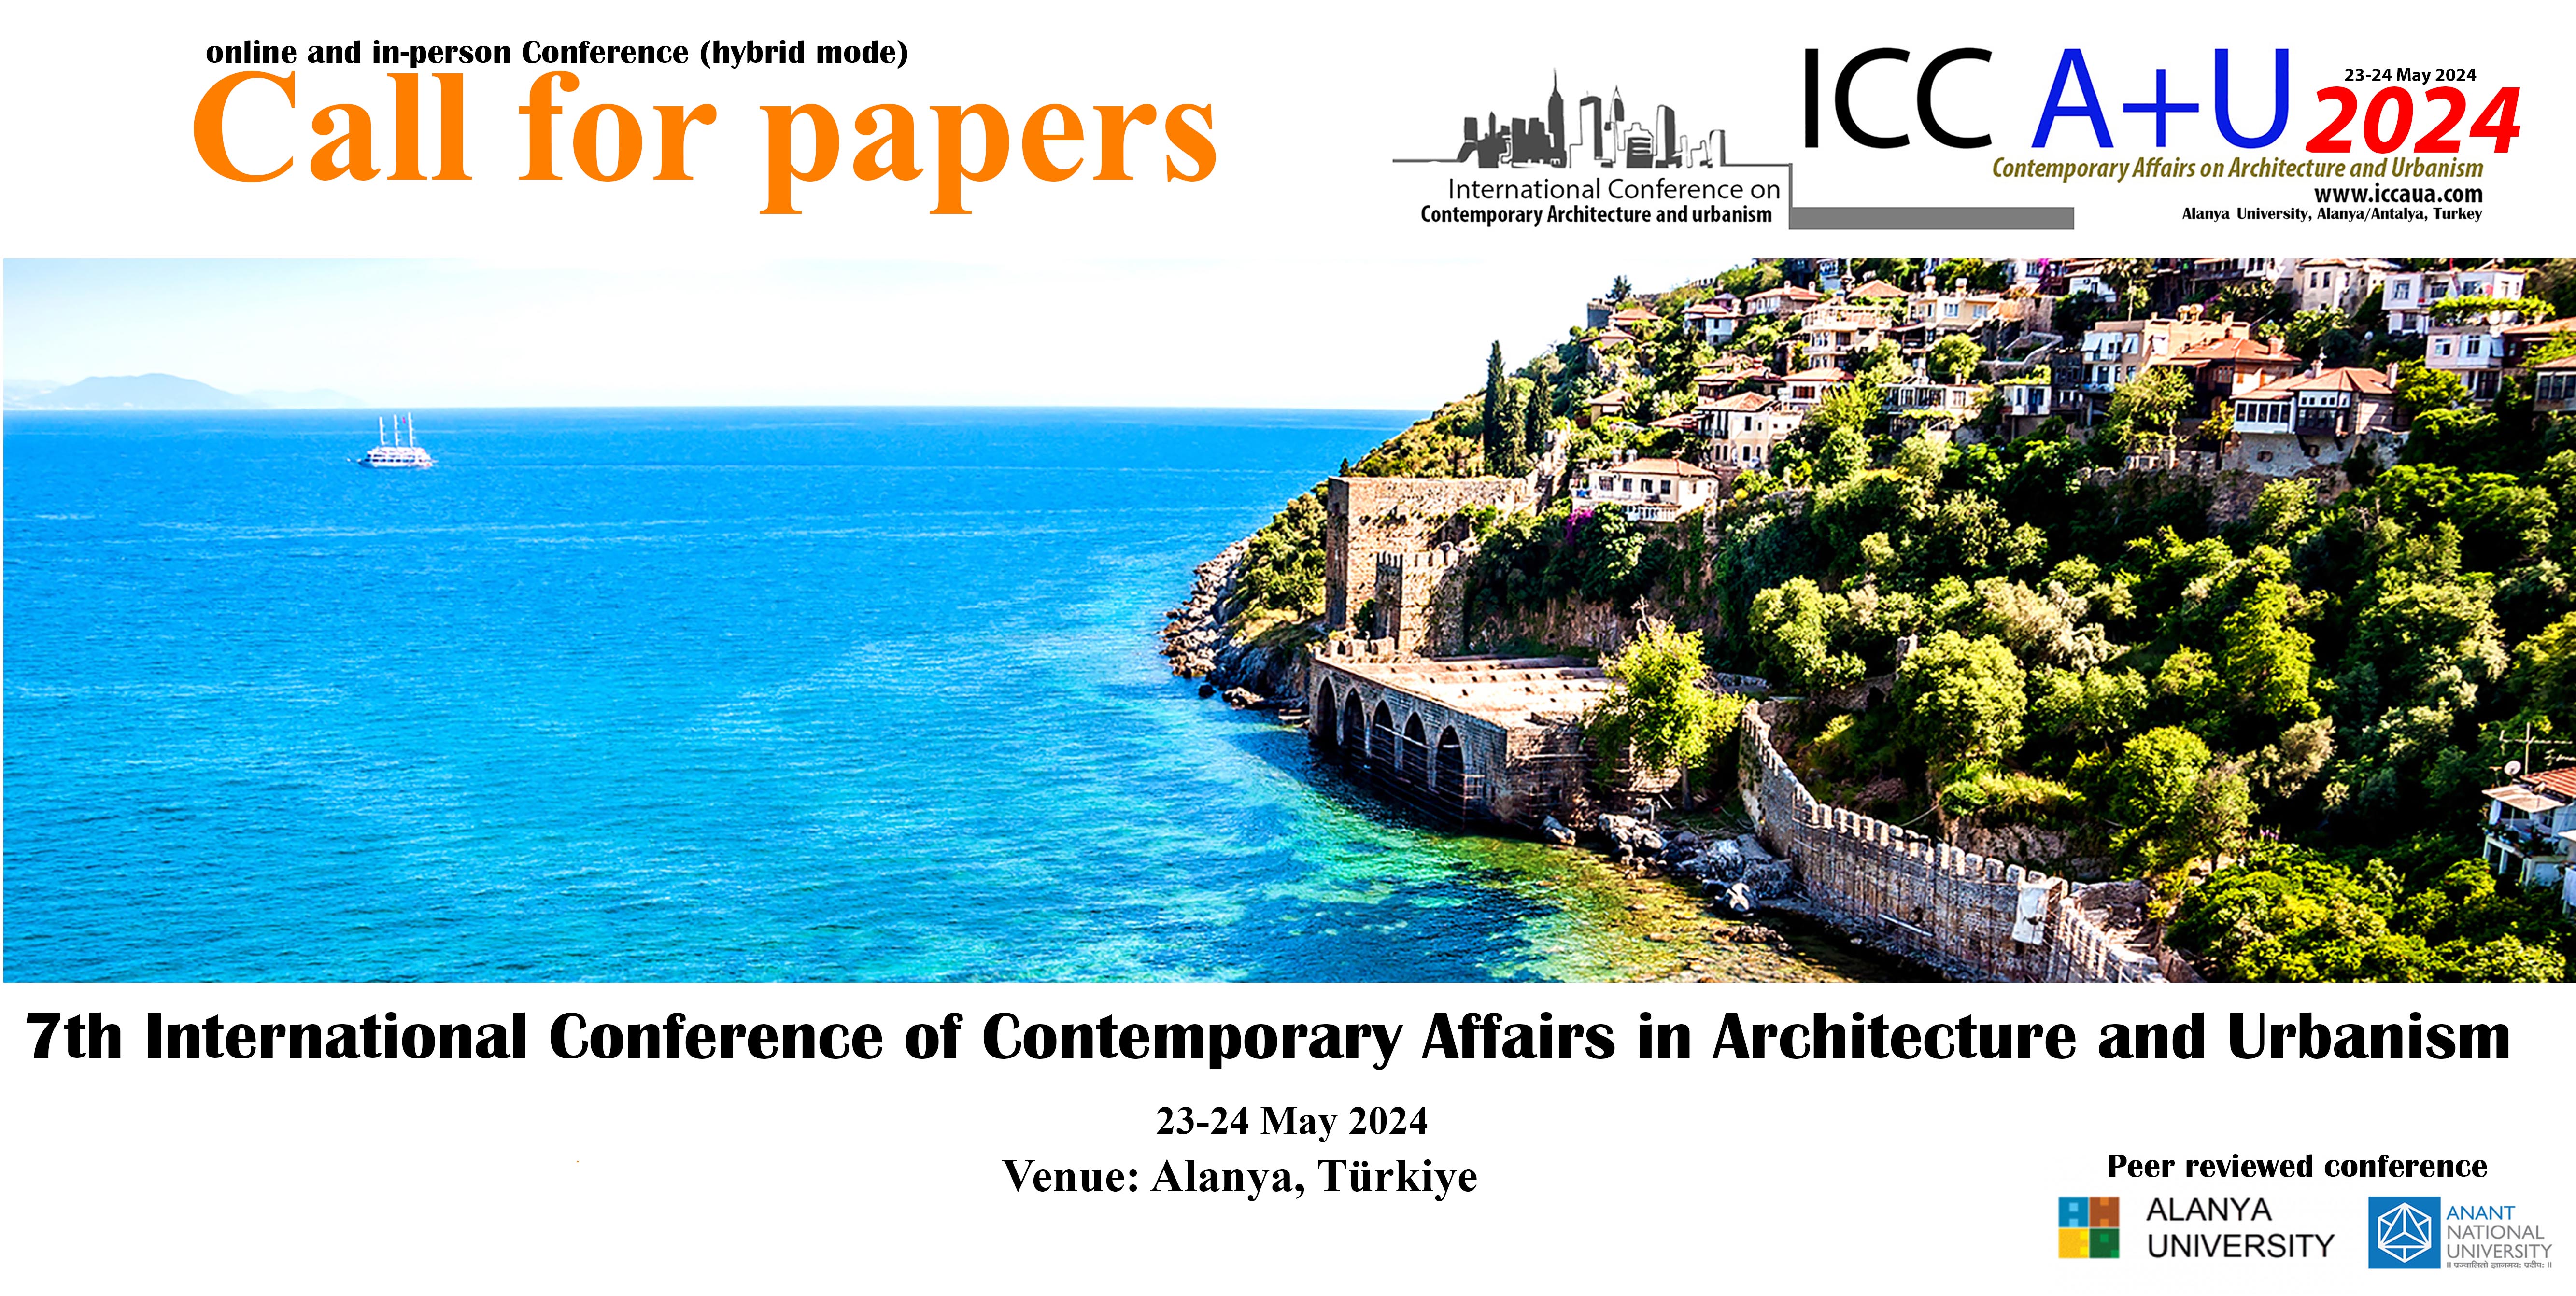 5th International conference of Contemporary Affairs on Architecture and Urbanism 2022 ICCAUA ALANYA HEP UNIVERSITY